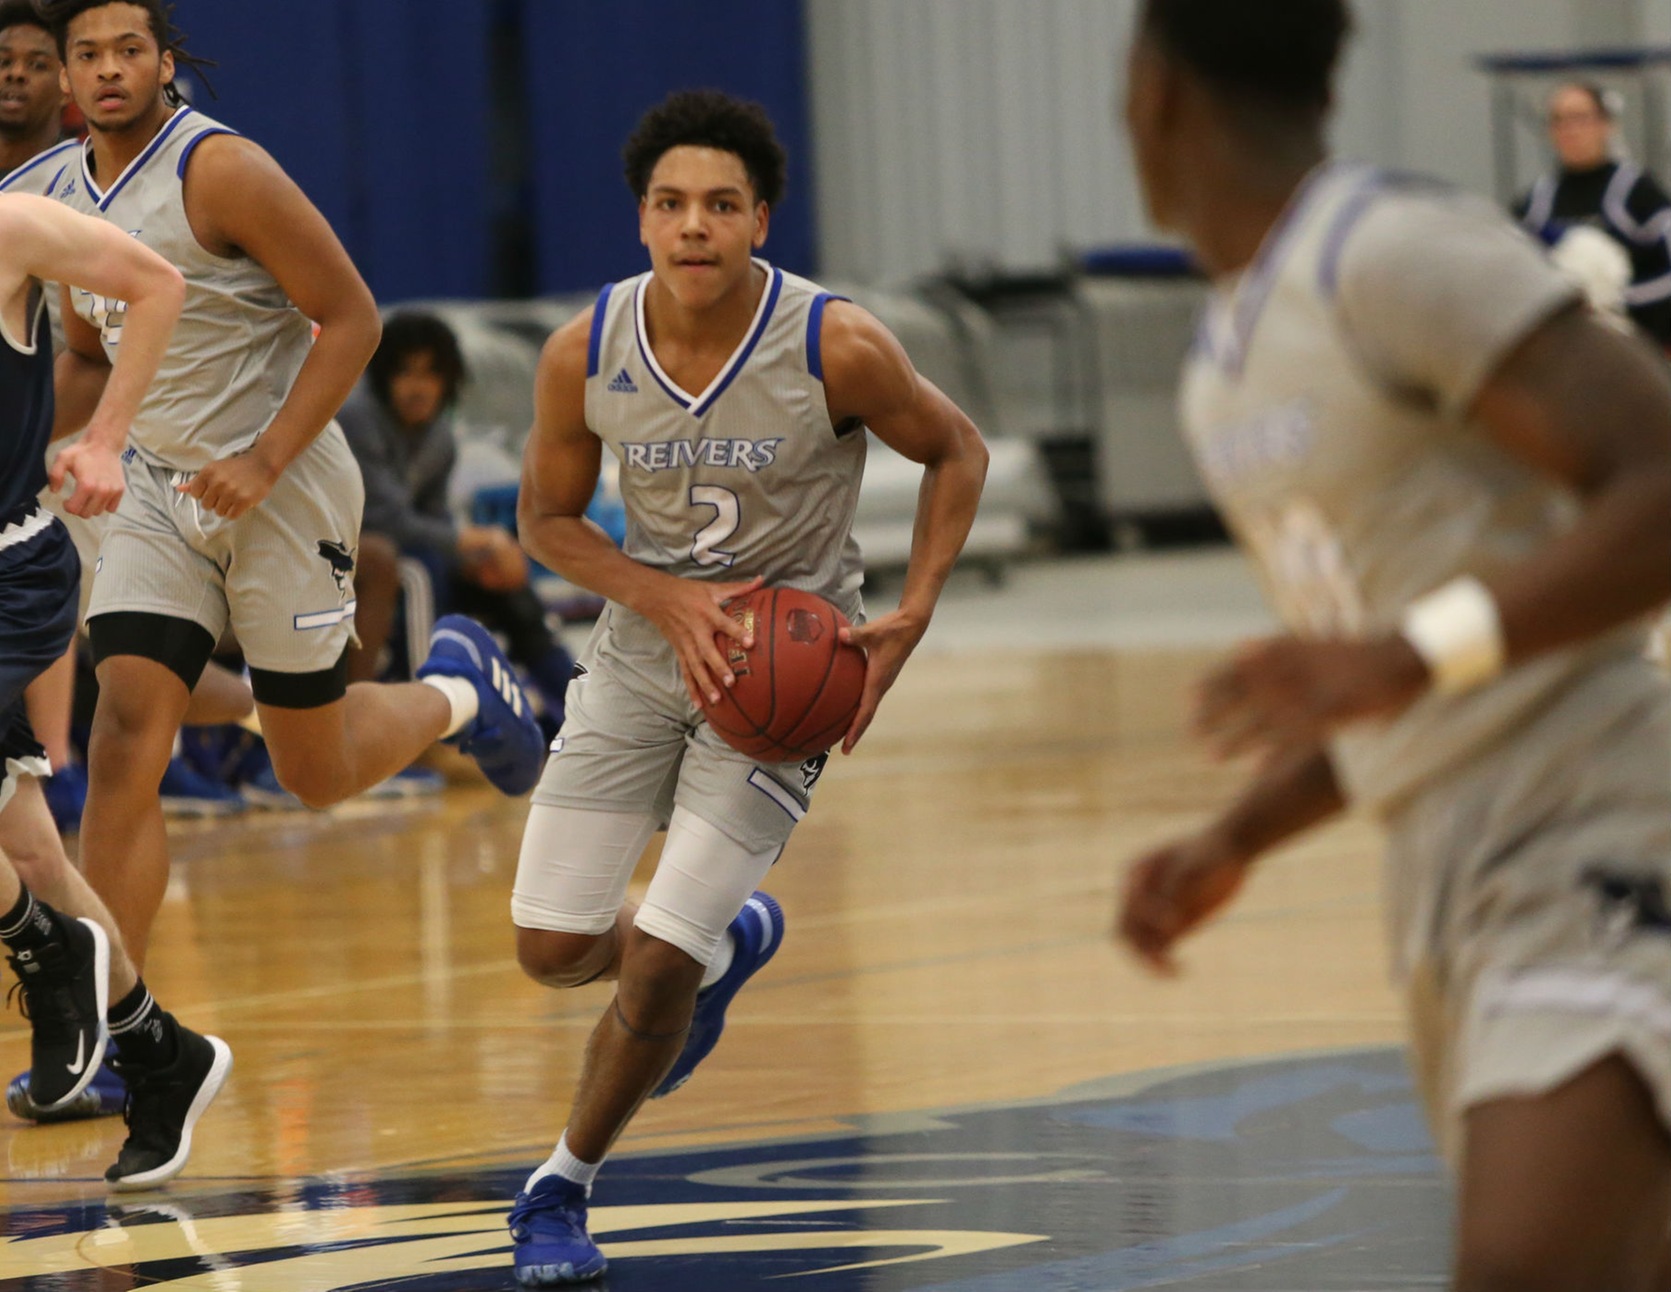 Josiah Strong (center) and Bryce Fitzgerald (left) scored 21 and 18 points respectively; as the Reivers won the 6th game out of their last 7 contests Tuesday (12/17) night.